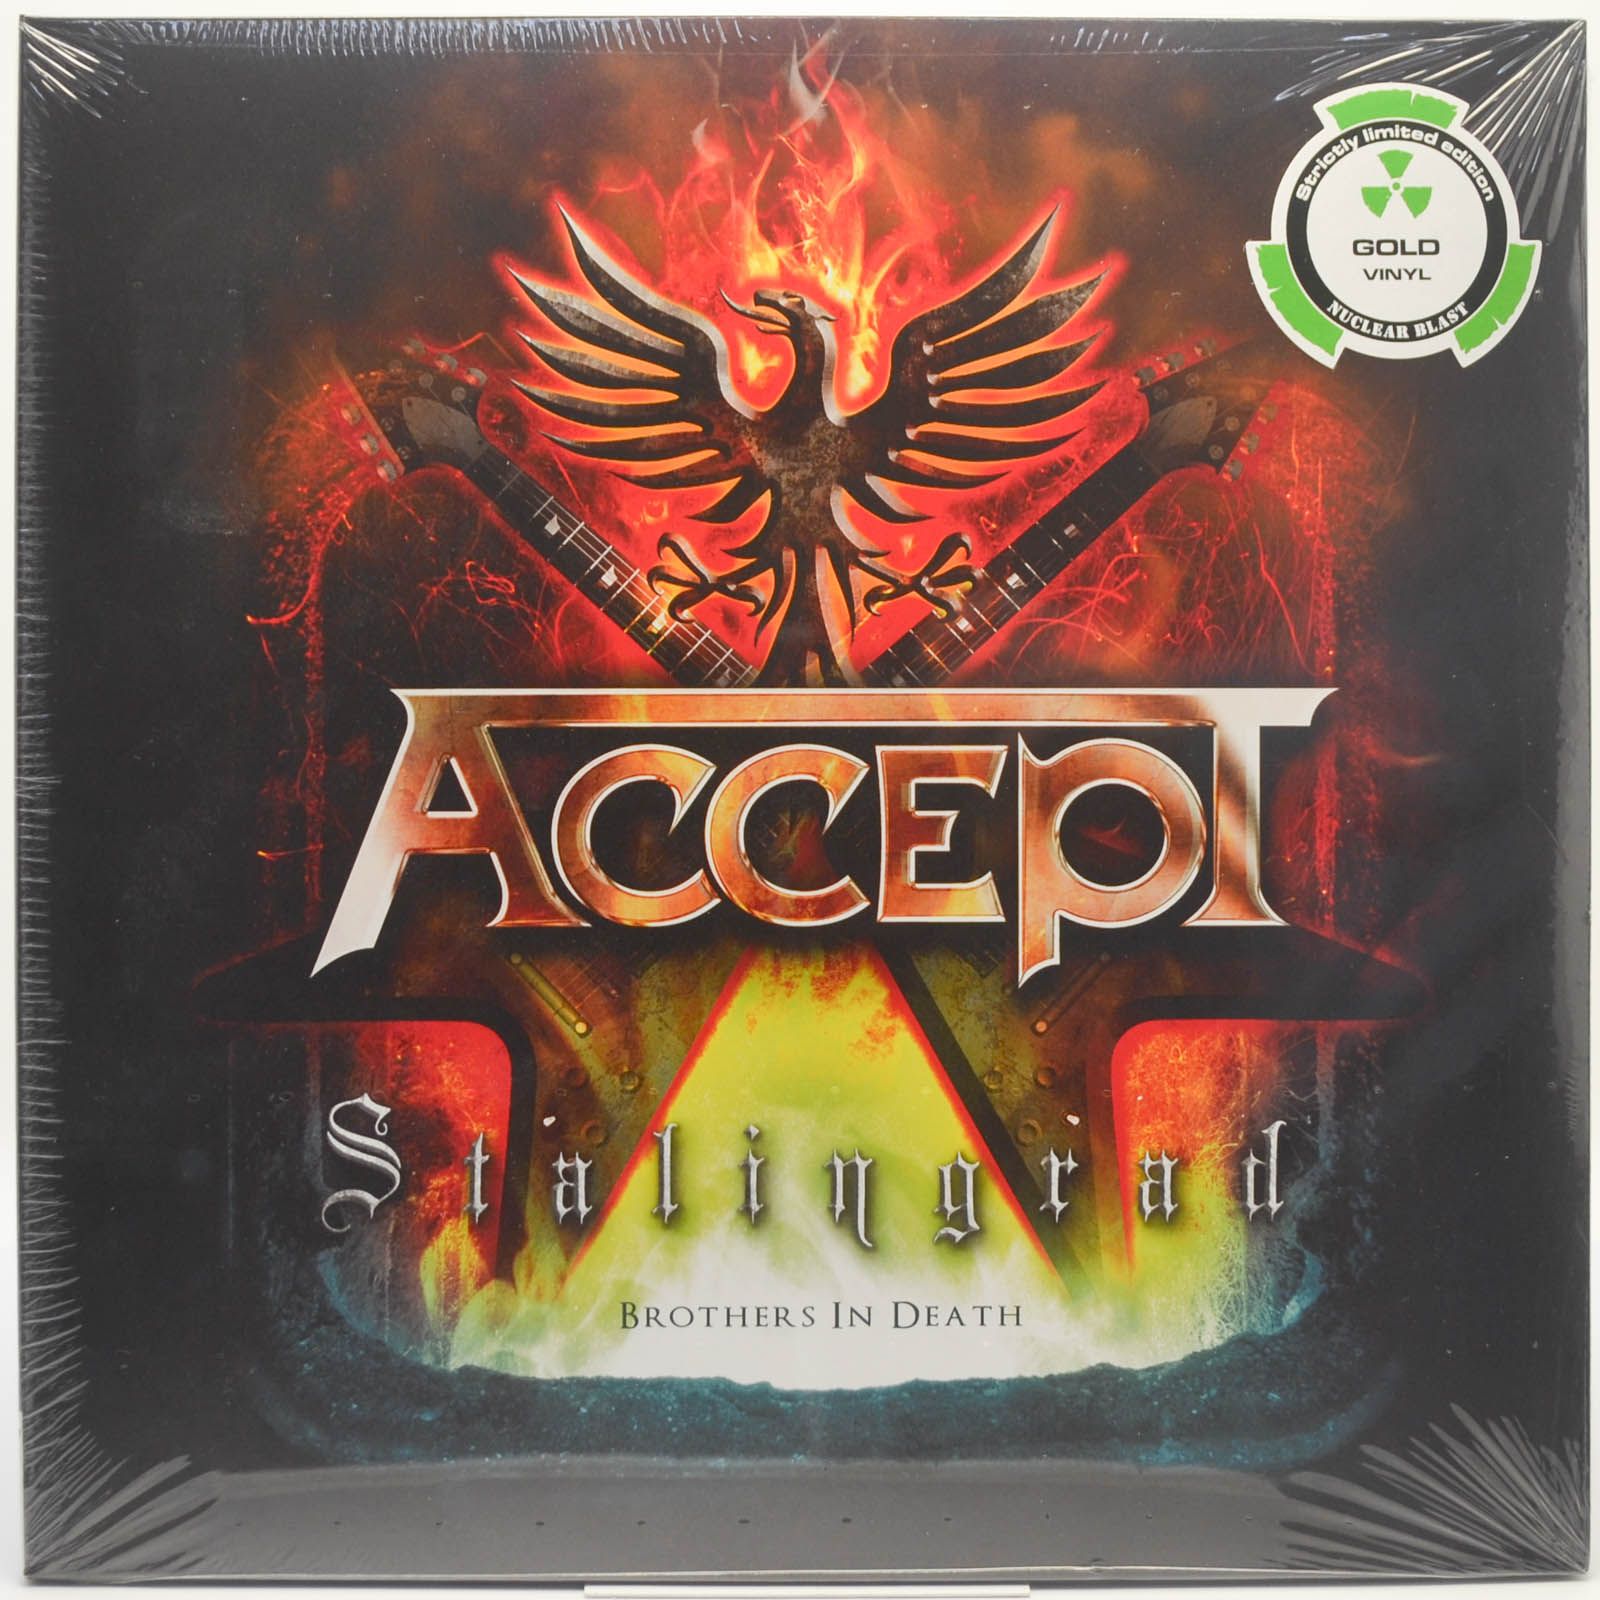 Accept — Stalingrad (Brothers In Death) (2LP), 2012